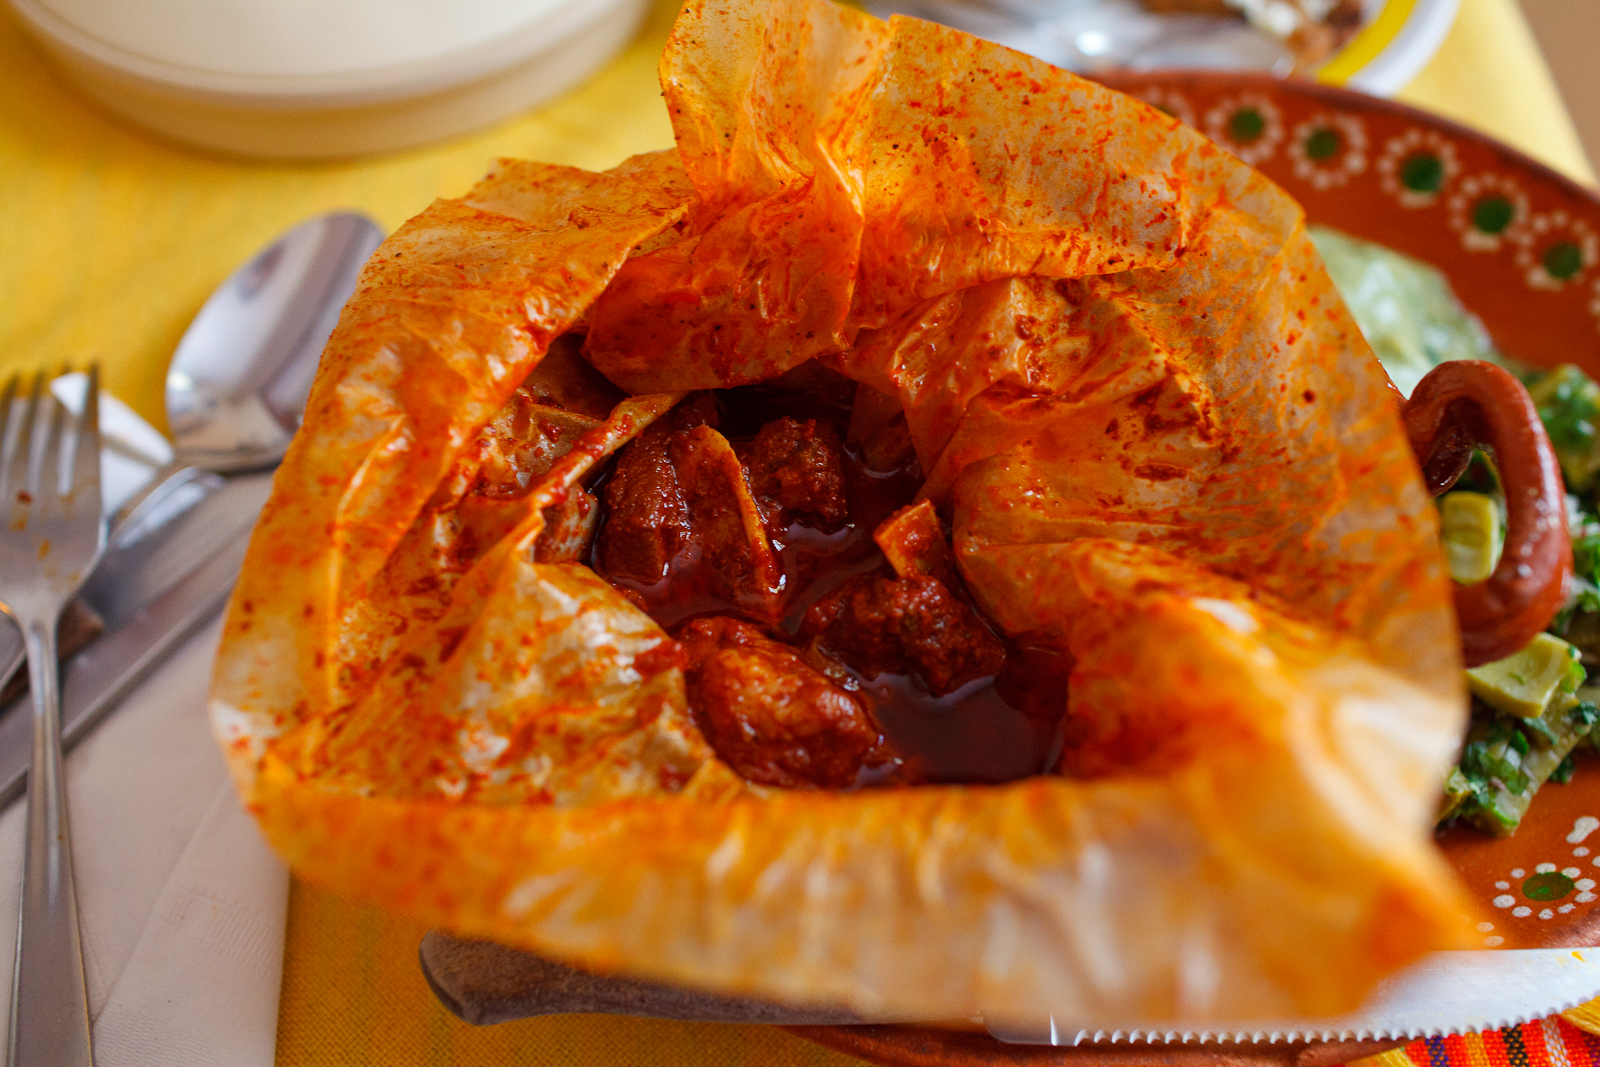 Mixiotes de carnero (Pit-barbecued mutton shank cooked in parchment), bag opened ($103 MXP)